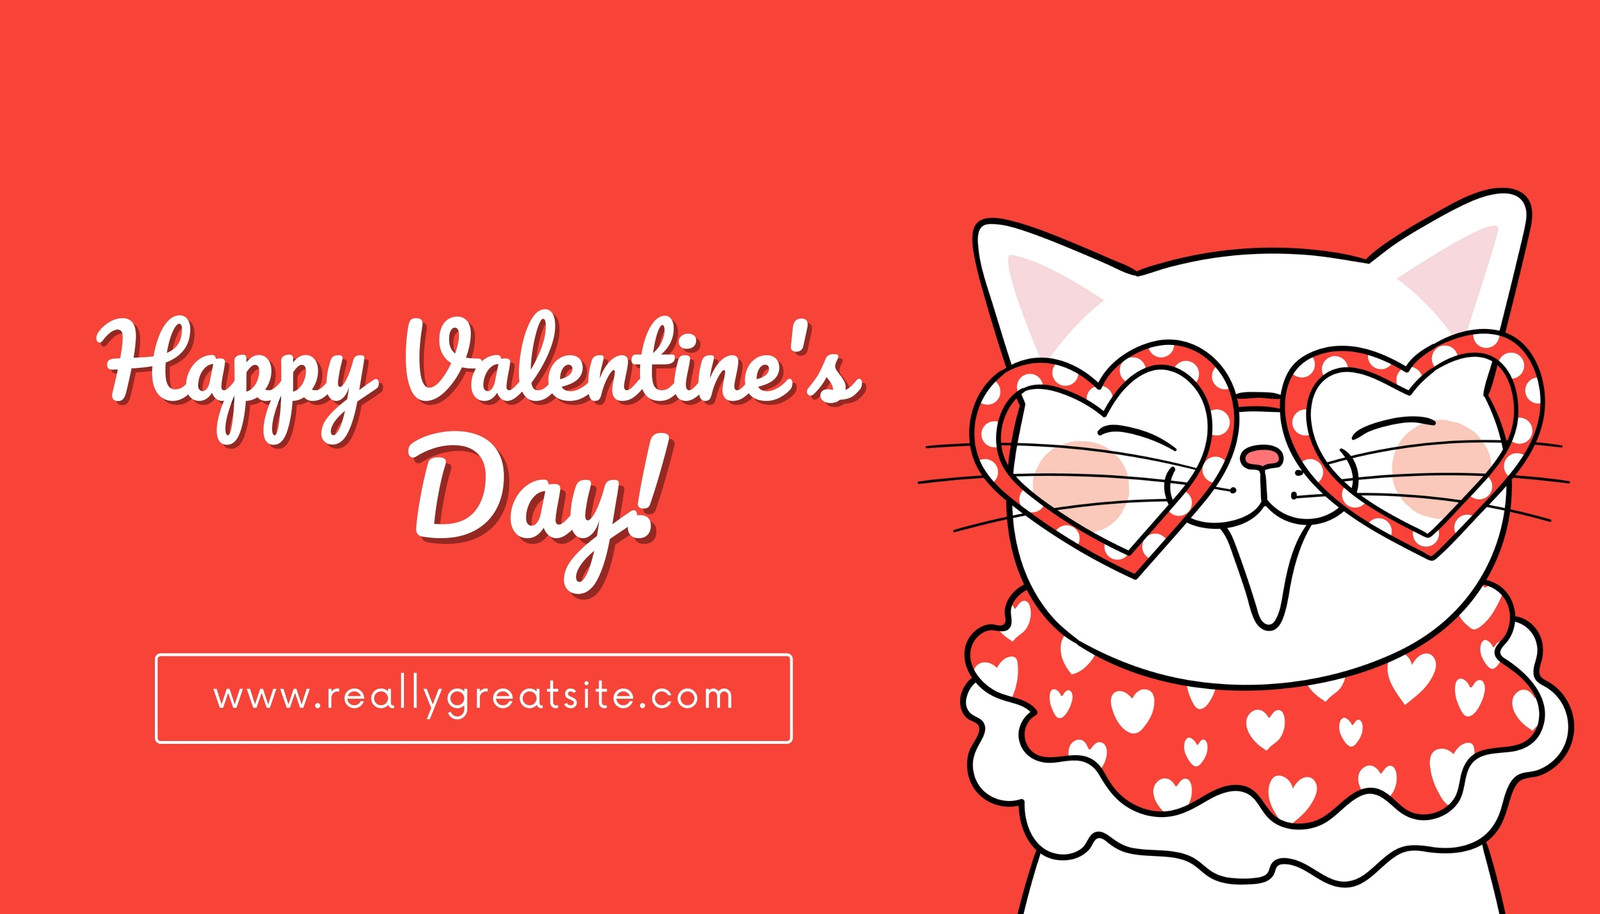 Page 18 - Free and customizable valentines day templates